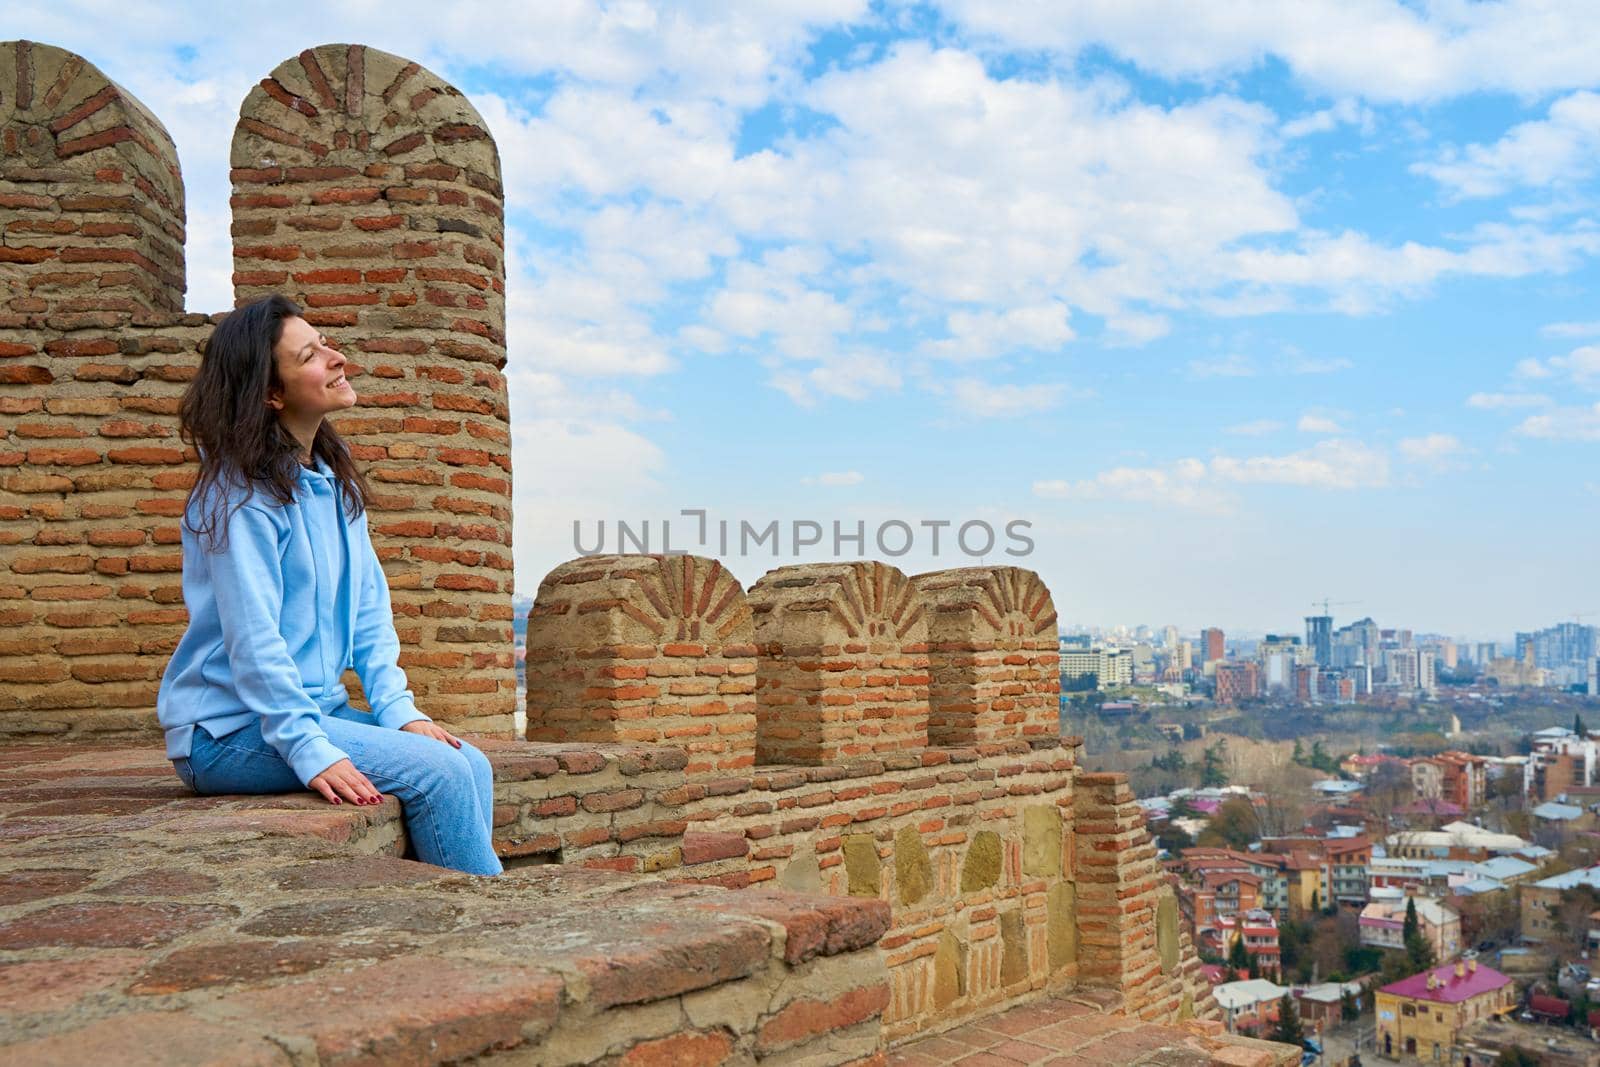 The girl enjoys the view and the silence while sitting on the wall of an ancient fortress overlooking the city by Try_my_best